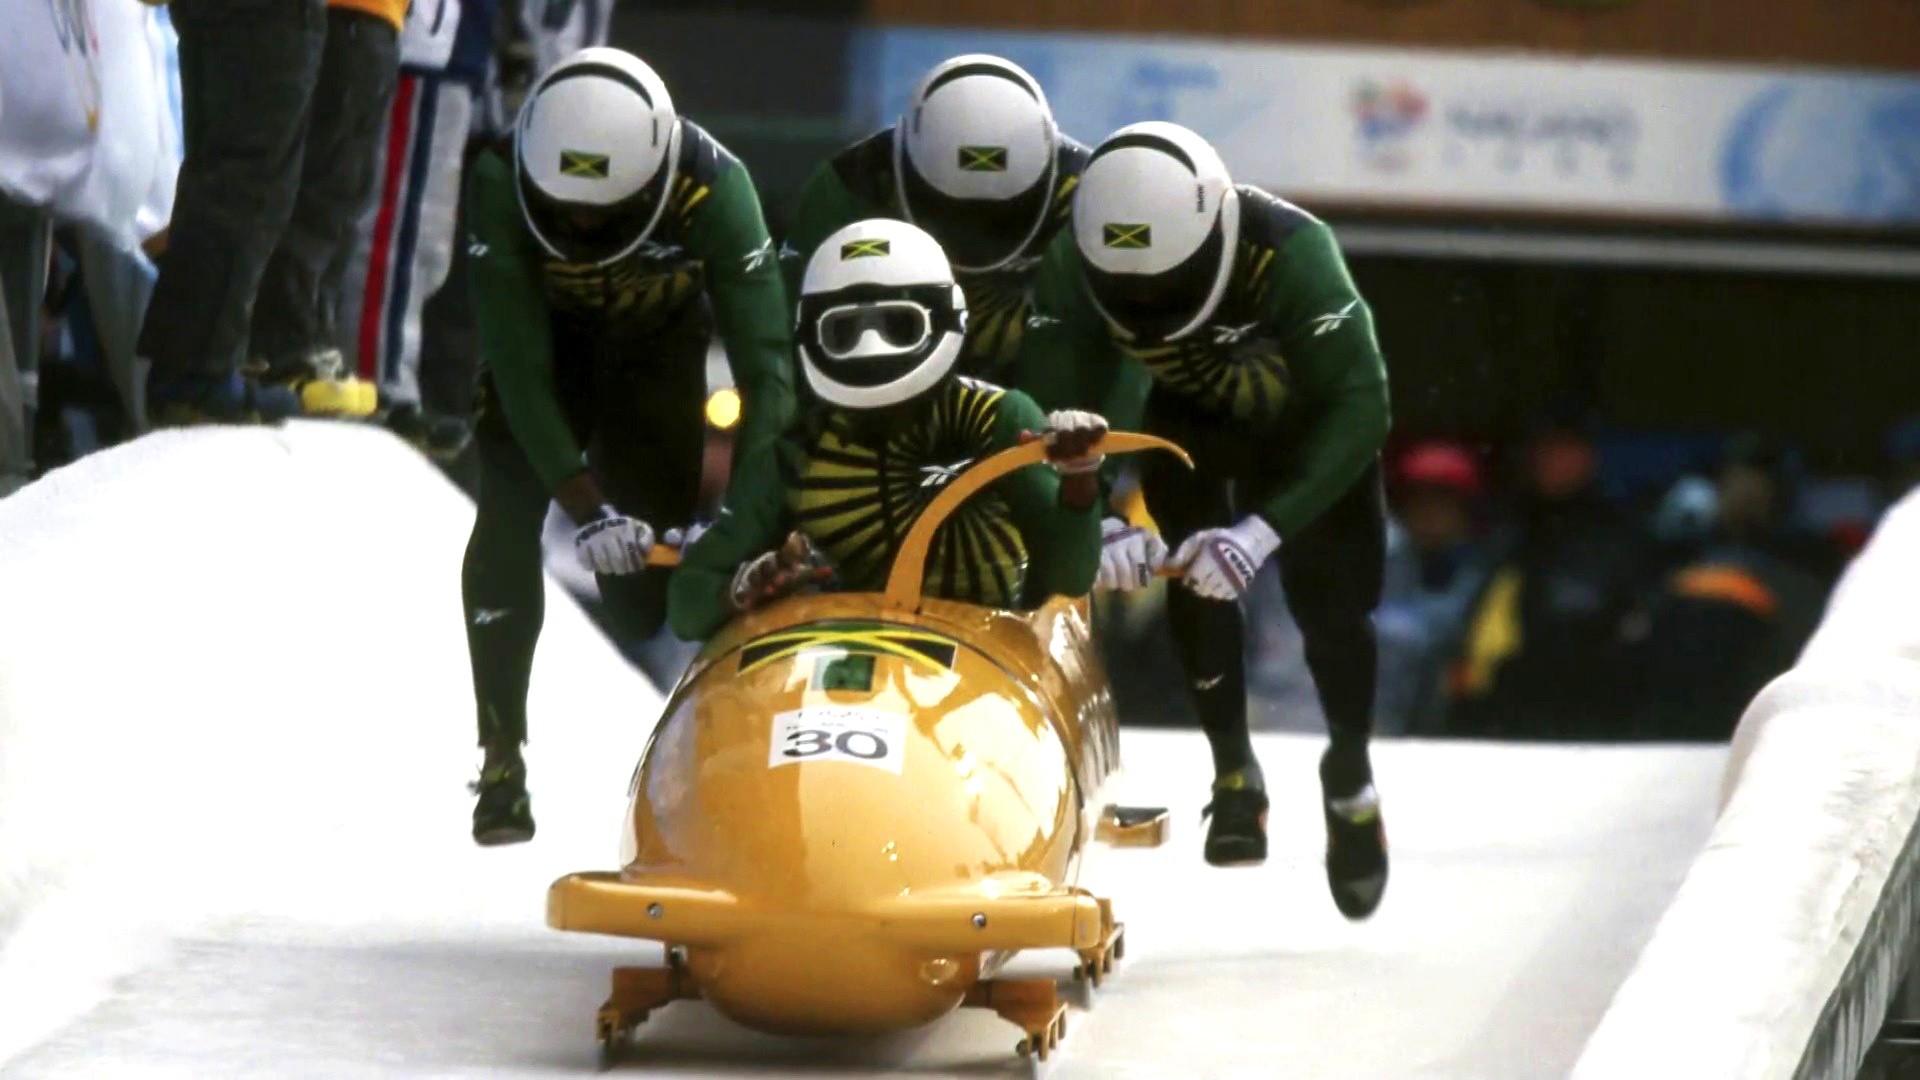 Jamaican bobsled team heads to Olympics for first time in 24 years